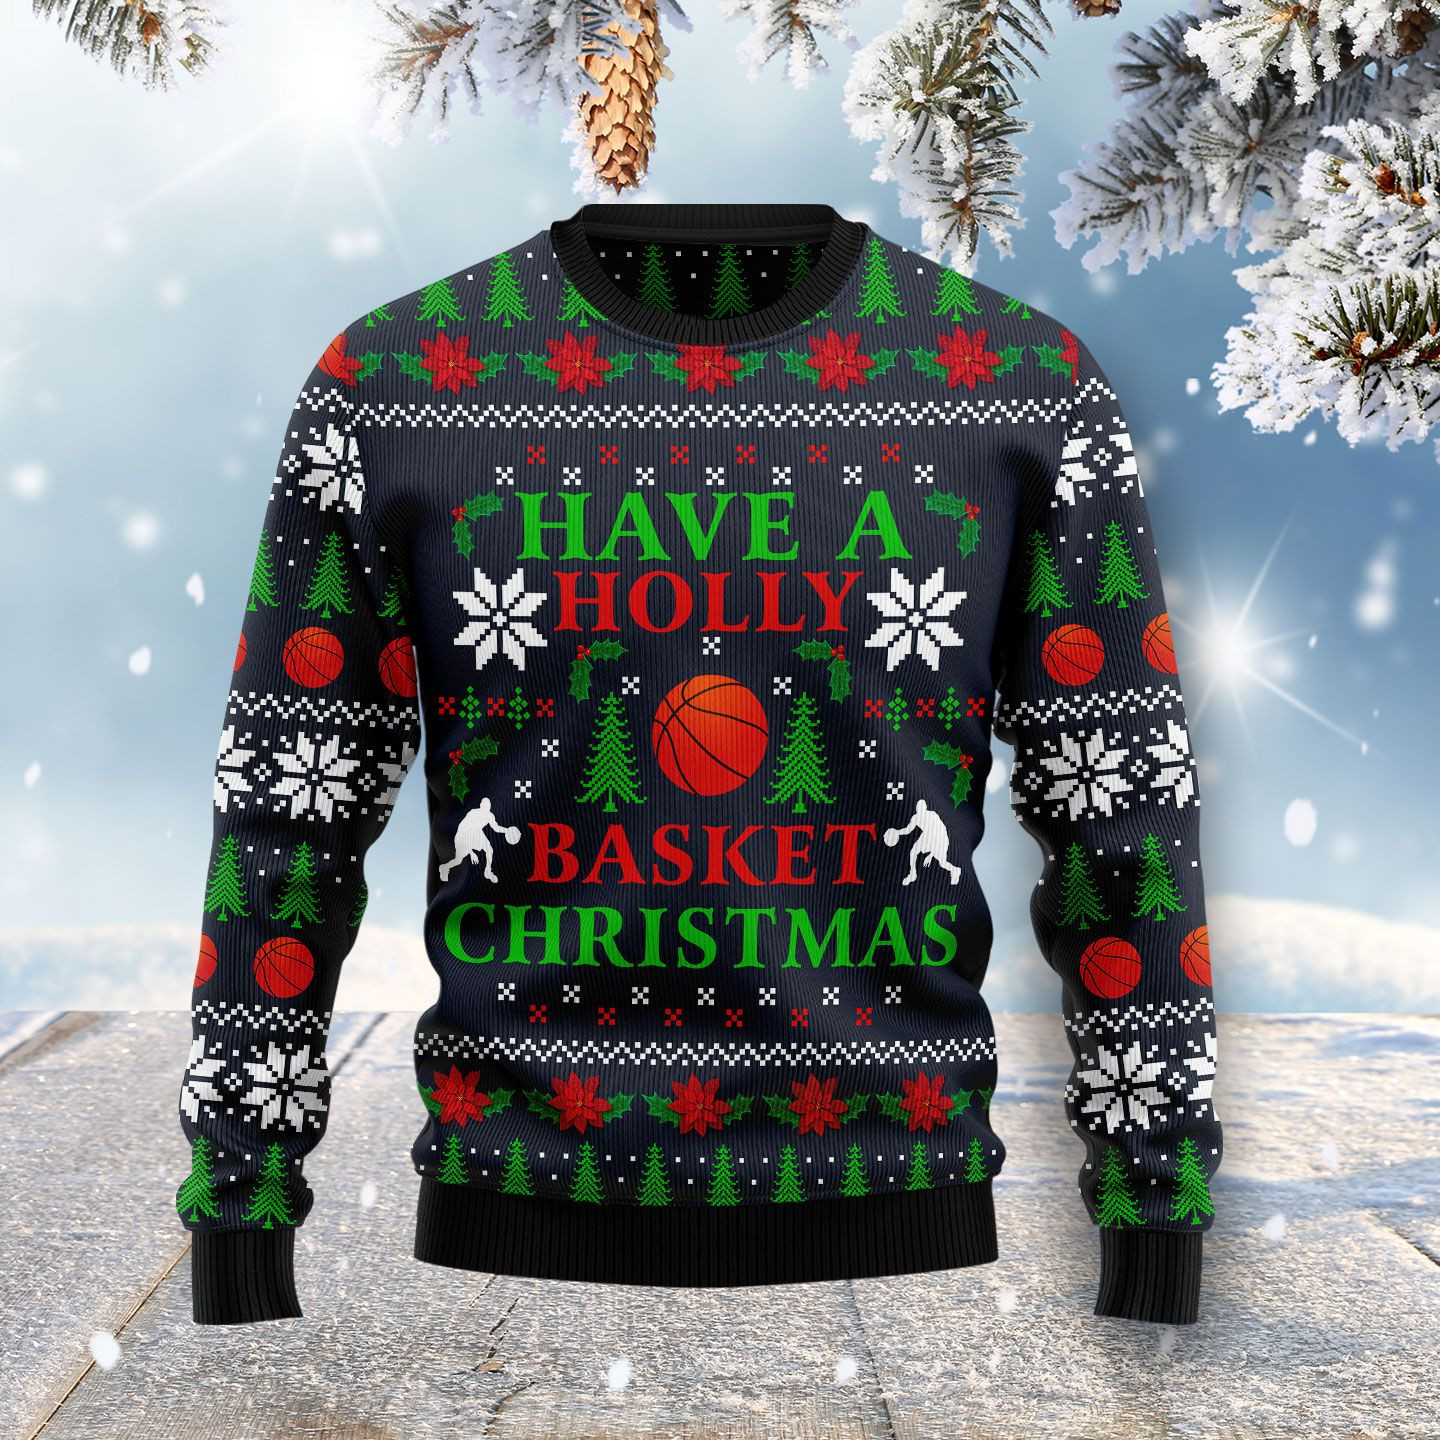 Holly Basket Basketball Christmas Ugly Christmas Sweater Ugly Sweater For Men Women